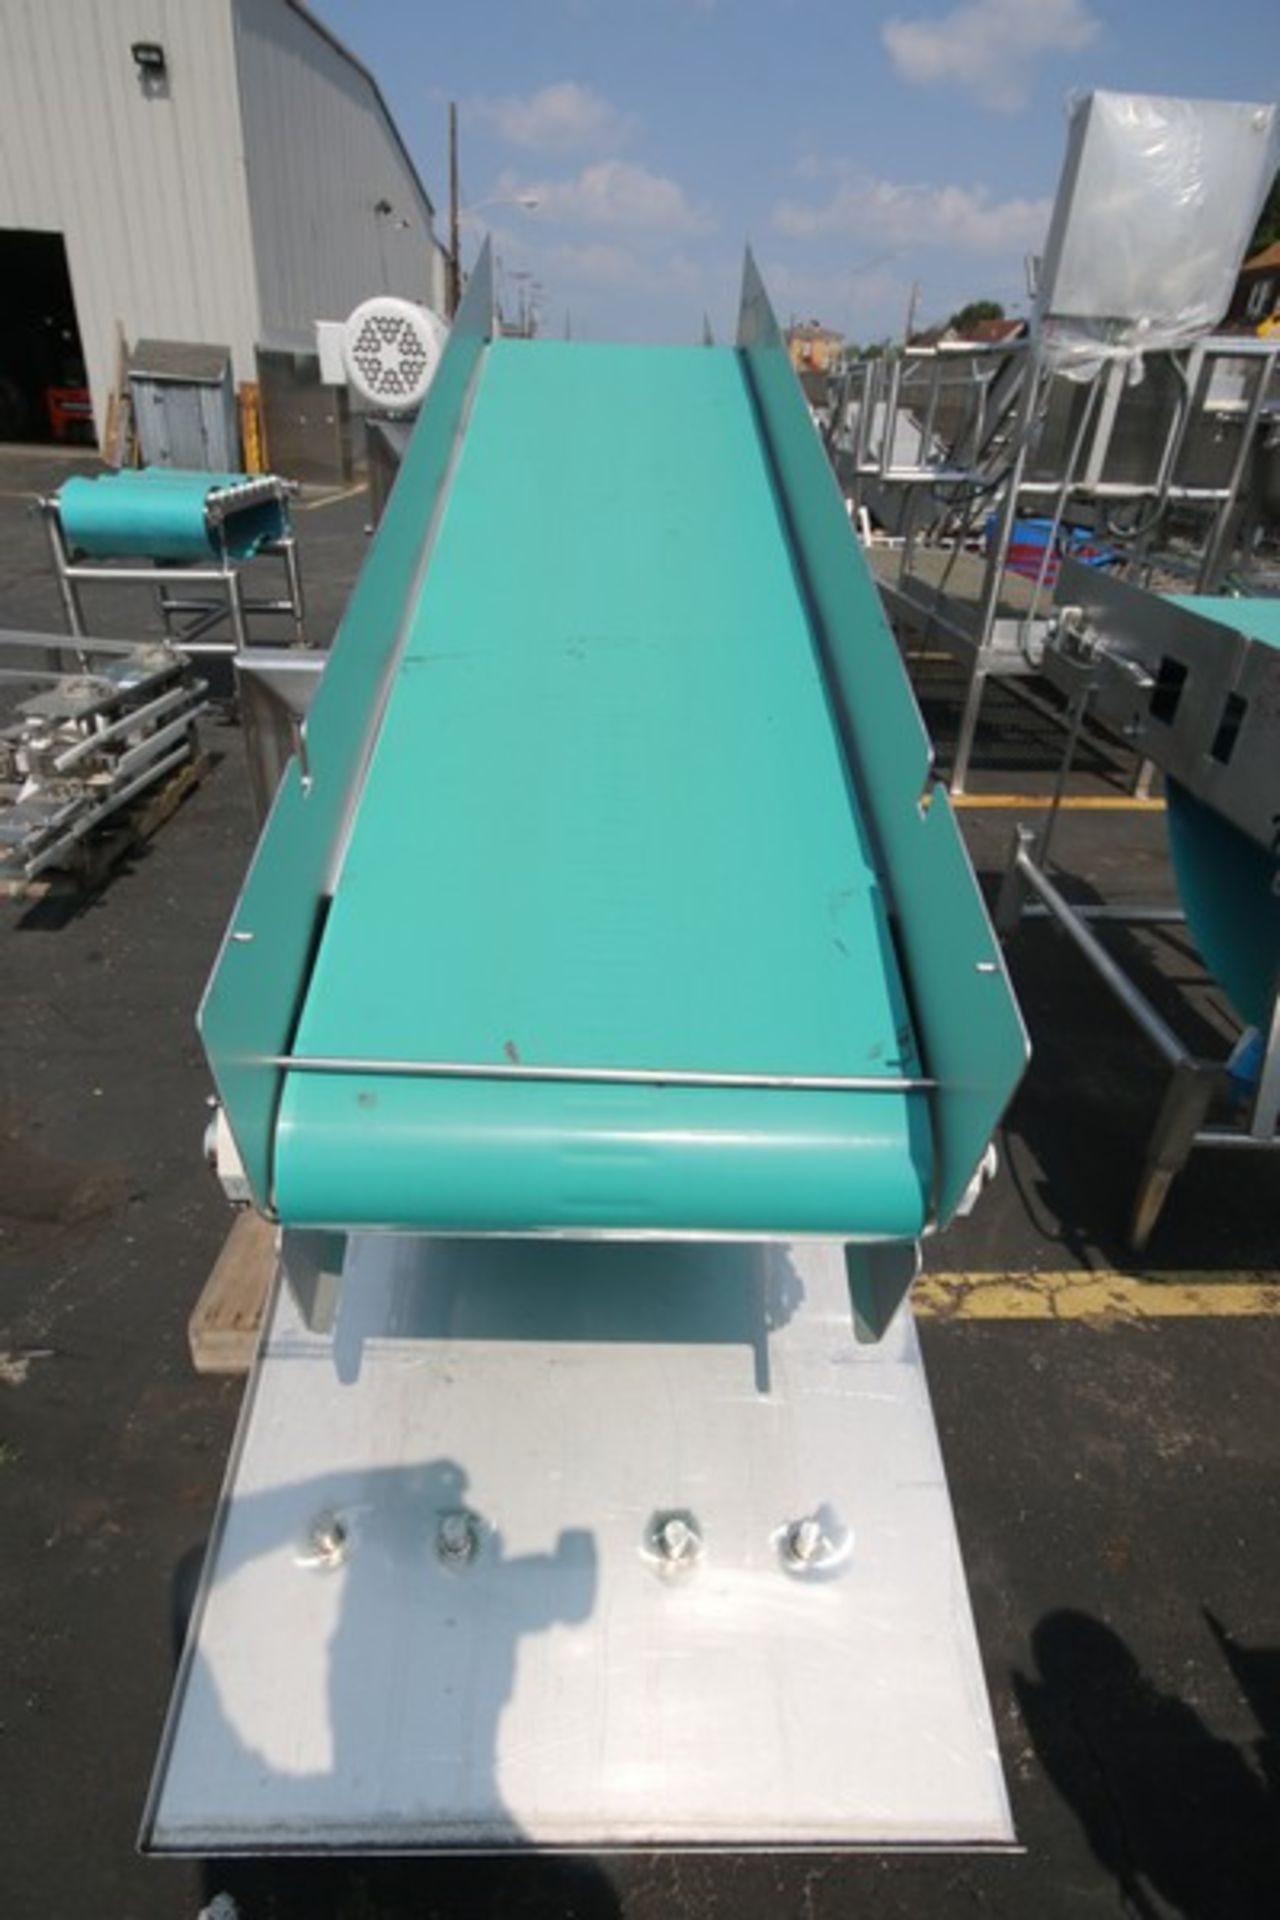 Keenline Aprox. 7' L x 36" to 58" H S/S Inclined Belt Conveyor with 20" W Belt, with Baldor Drive - Image 2 of 3